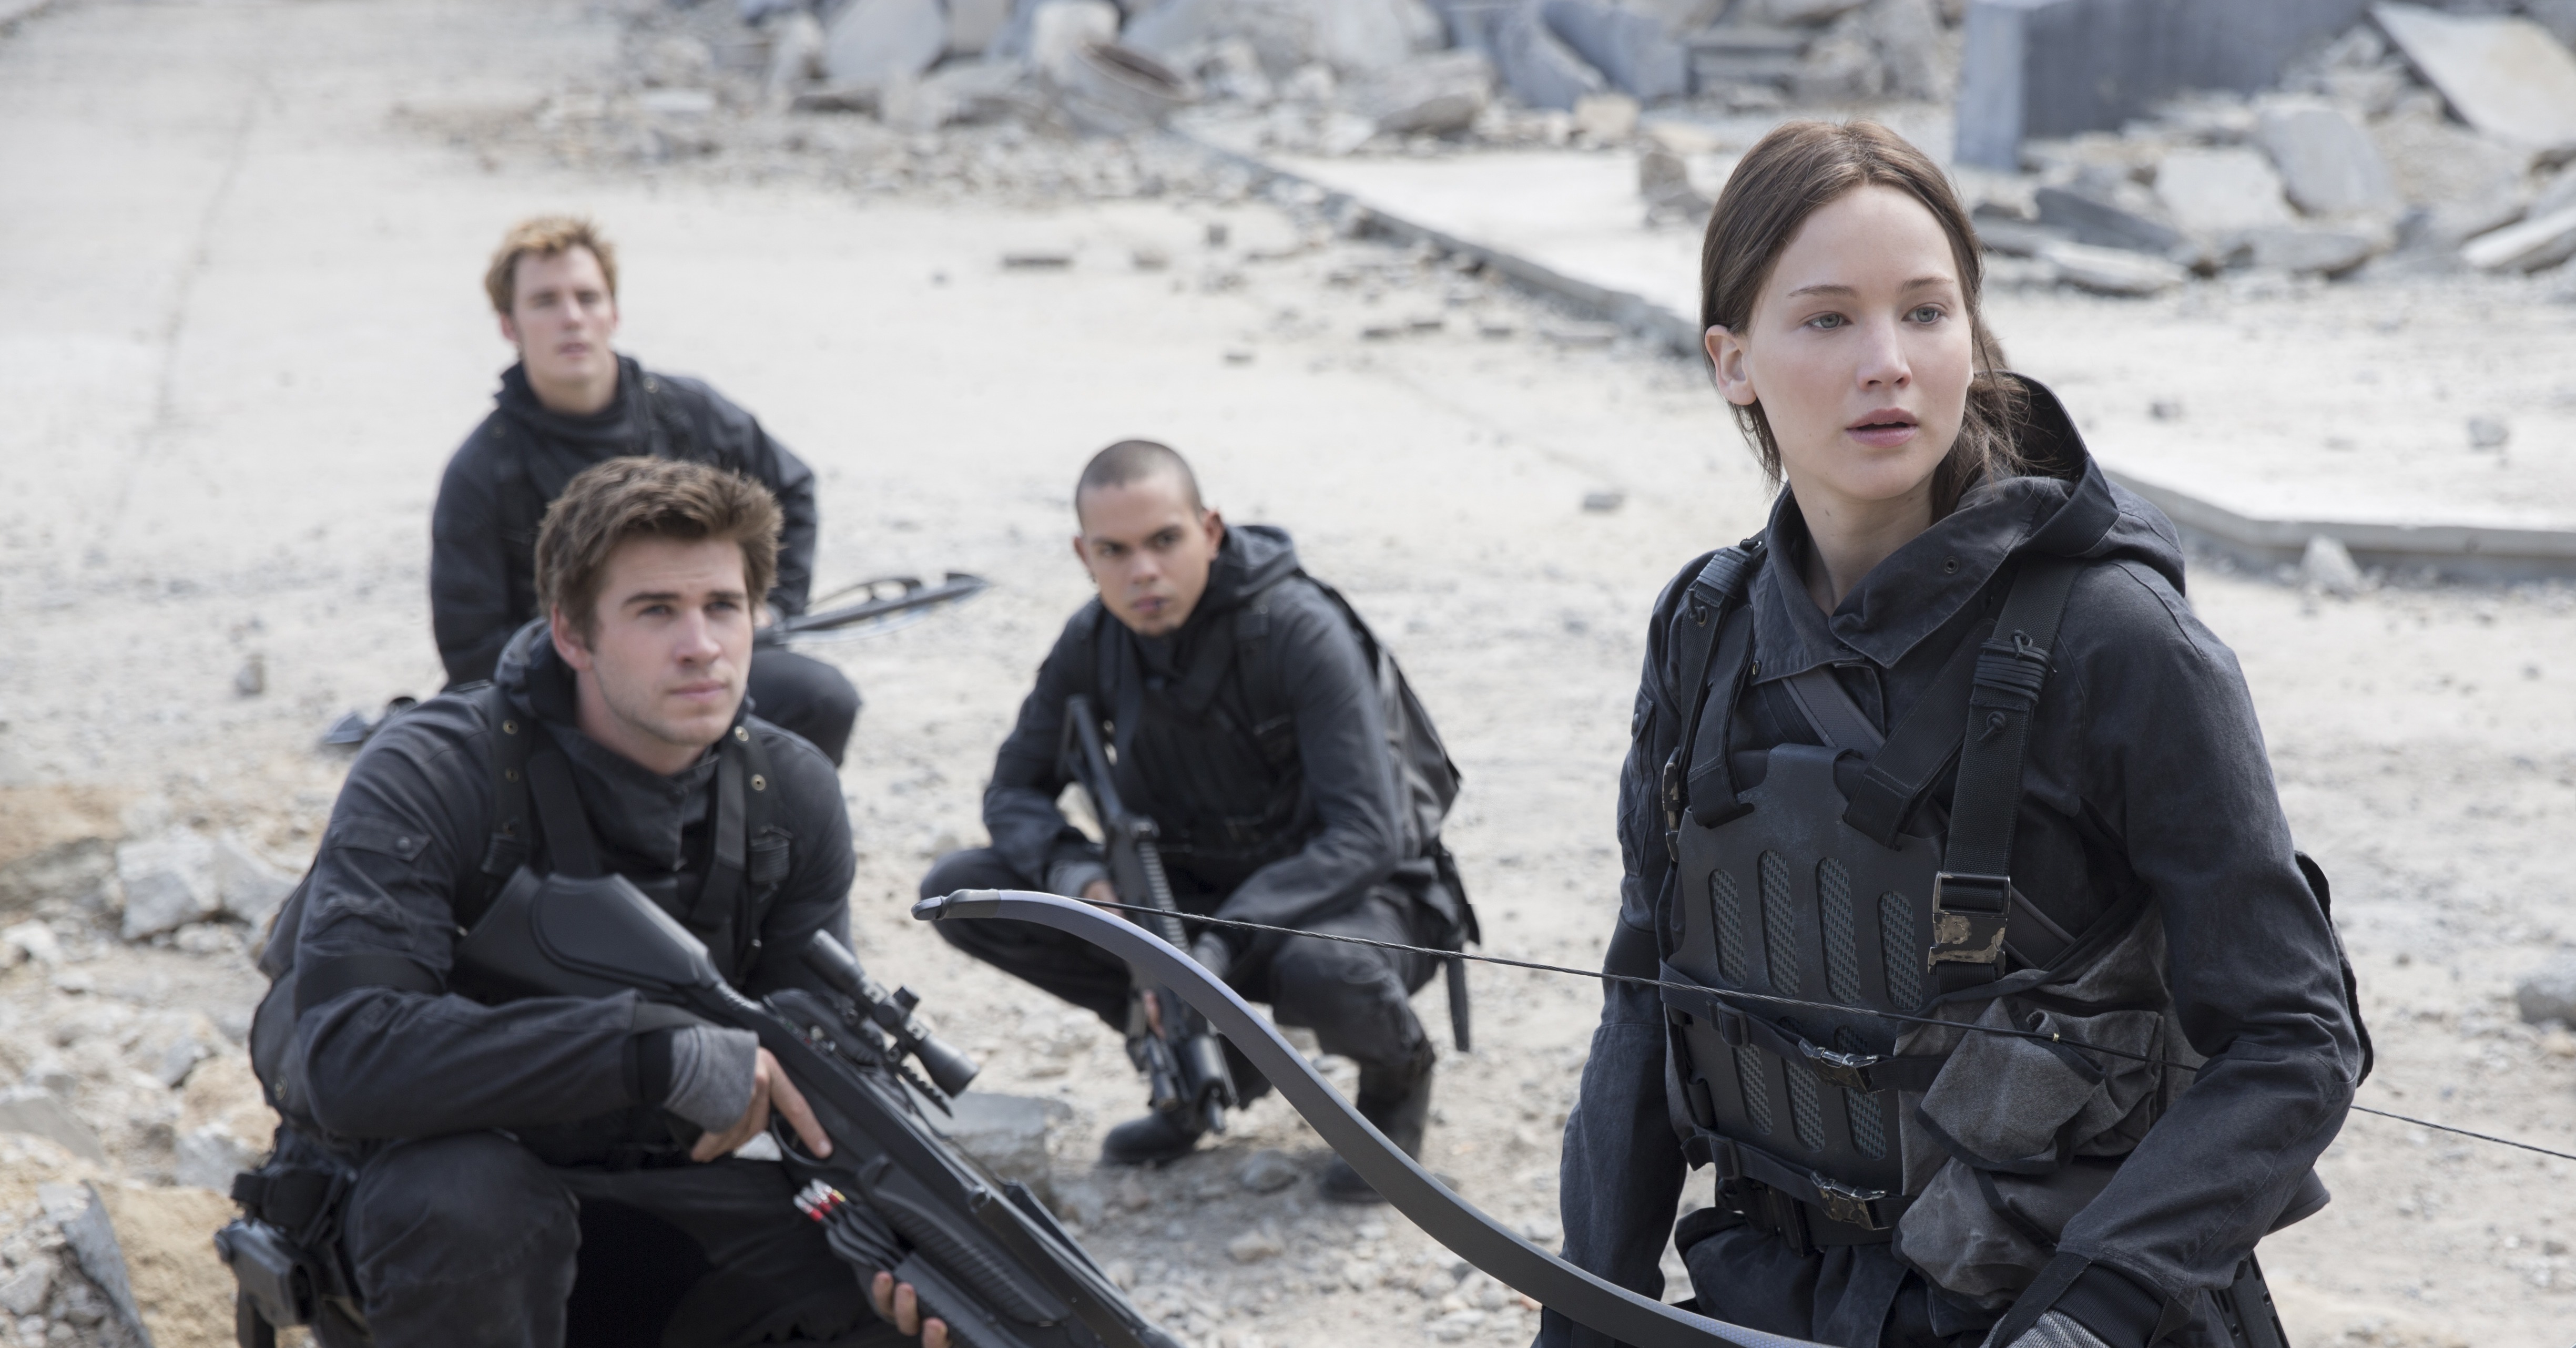 What Are The Showtimes For The Hunger Games